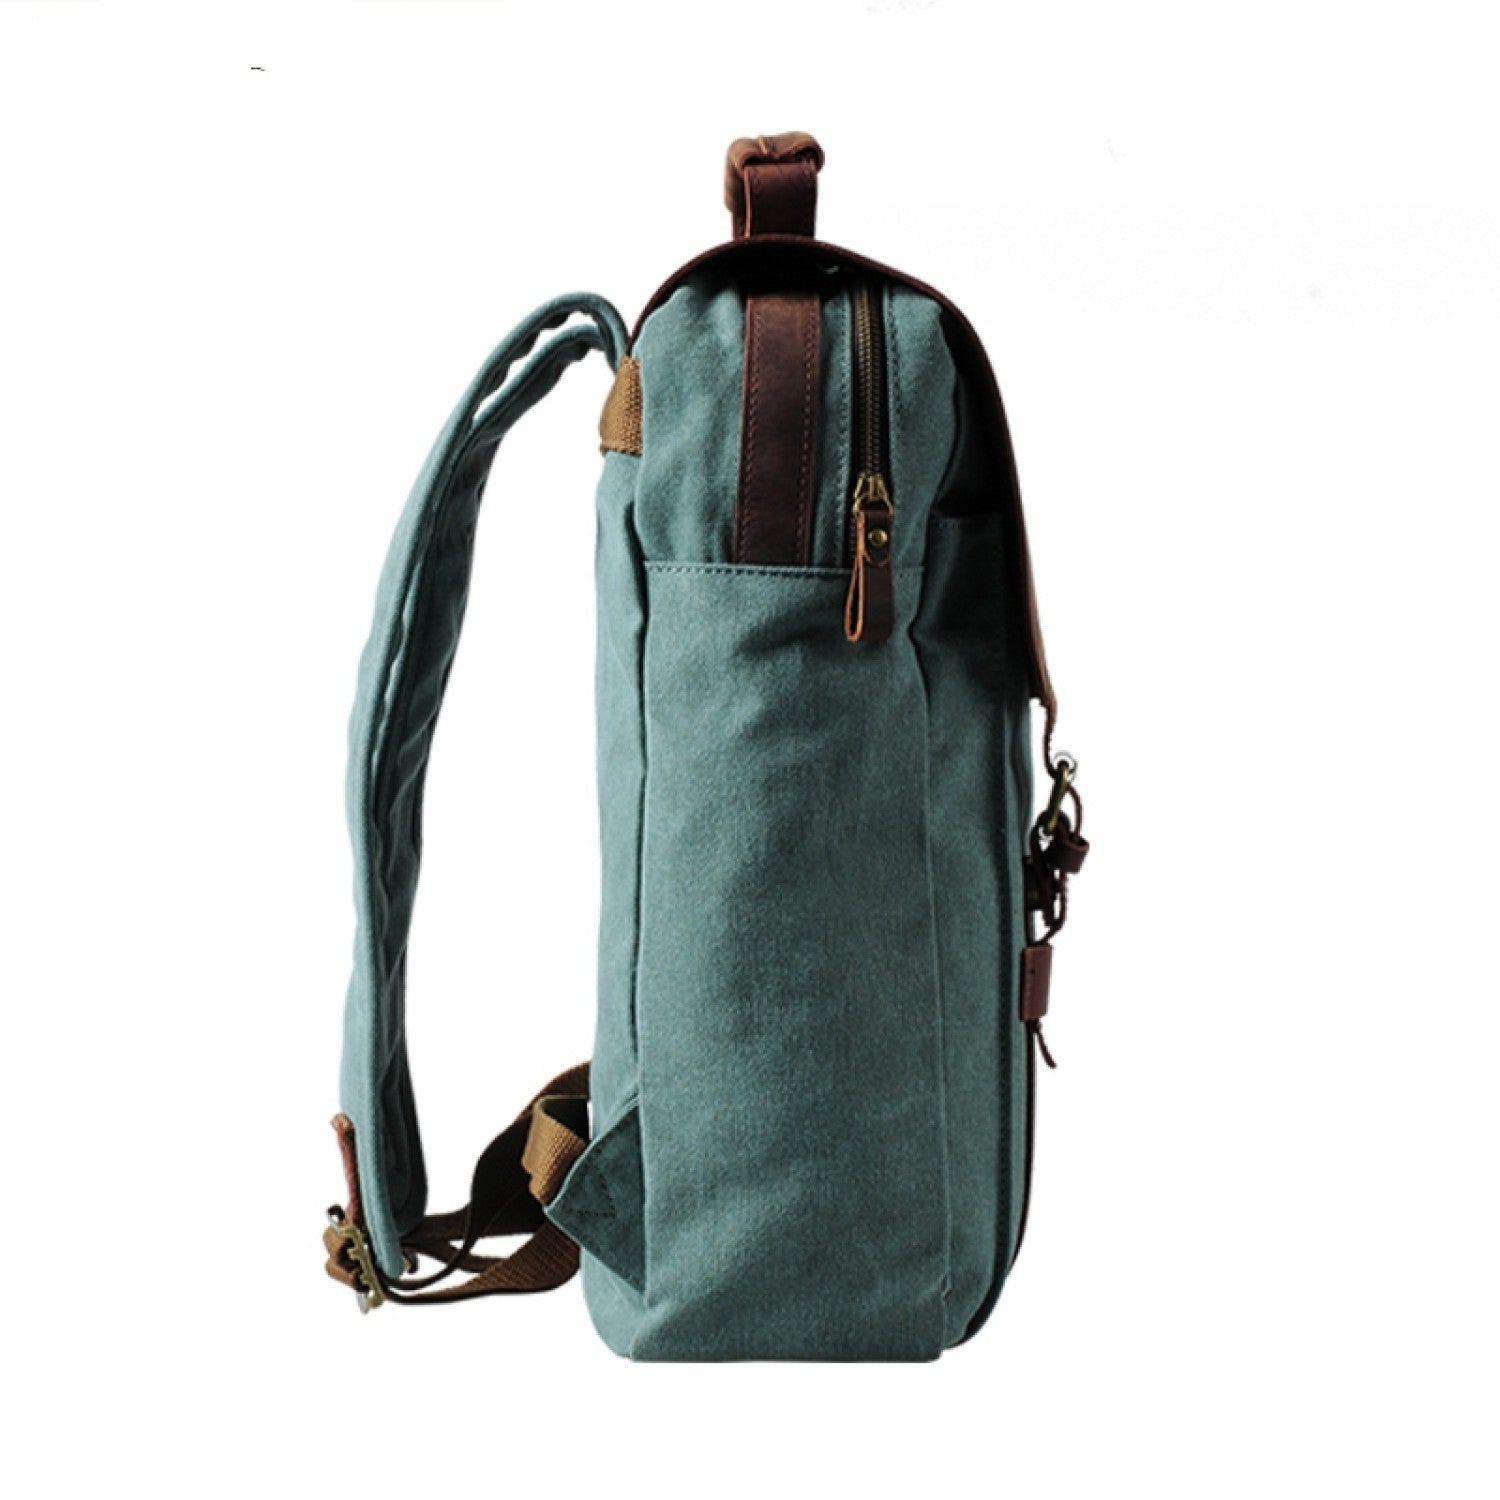 Small Canvas Backpack - Women's Vintage Bag